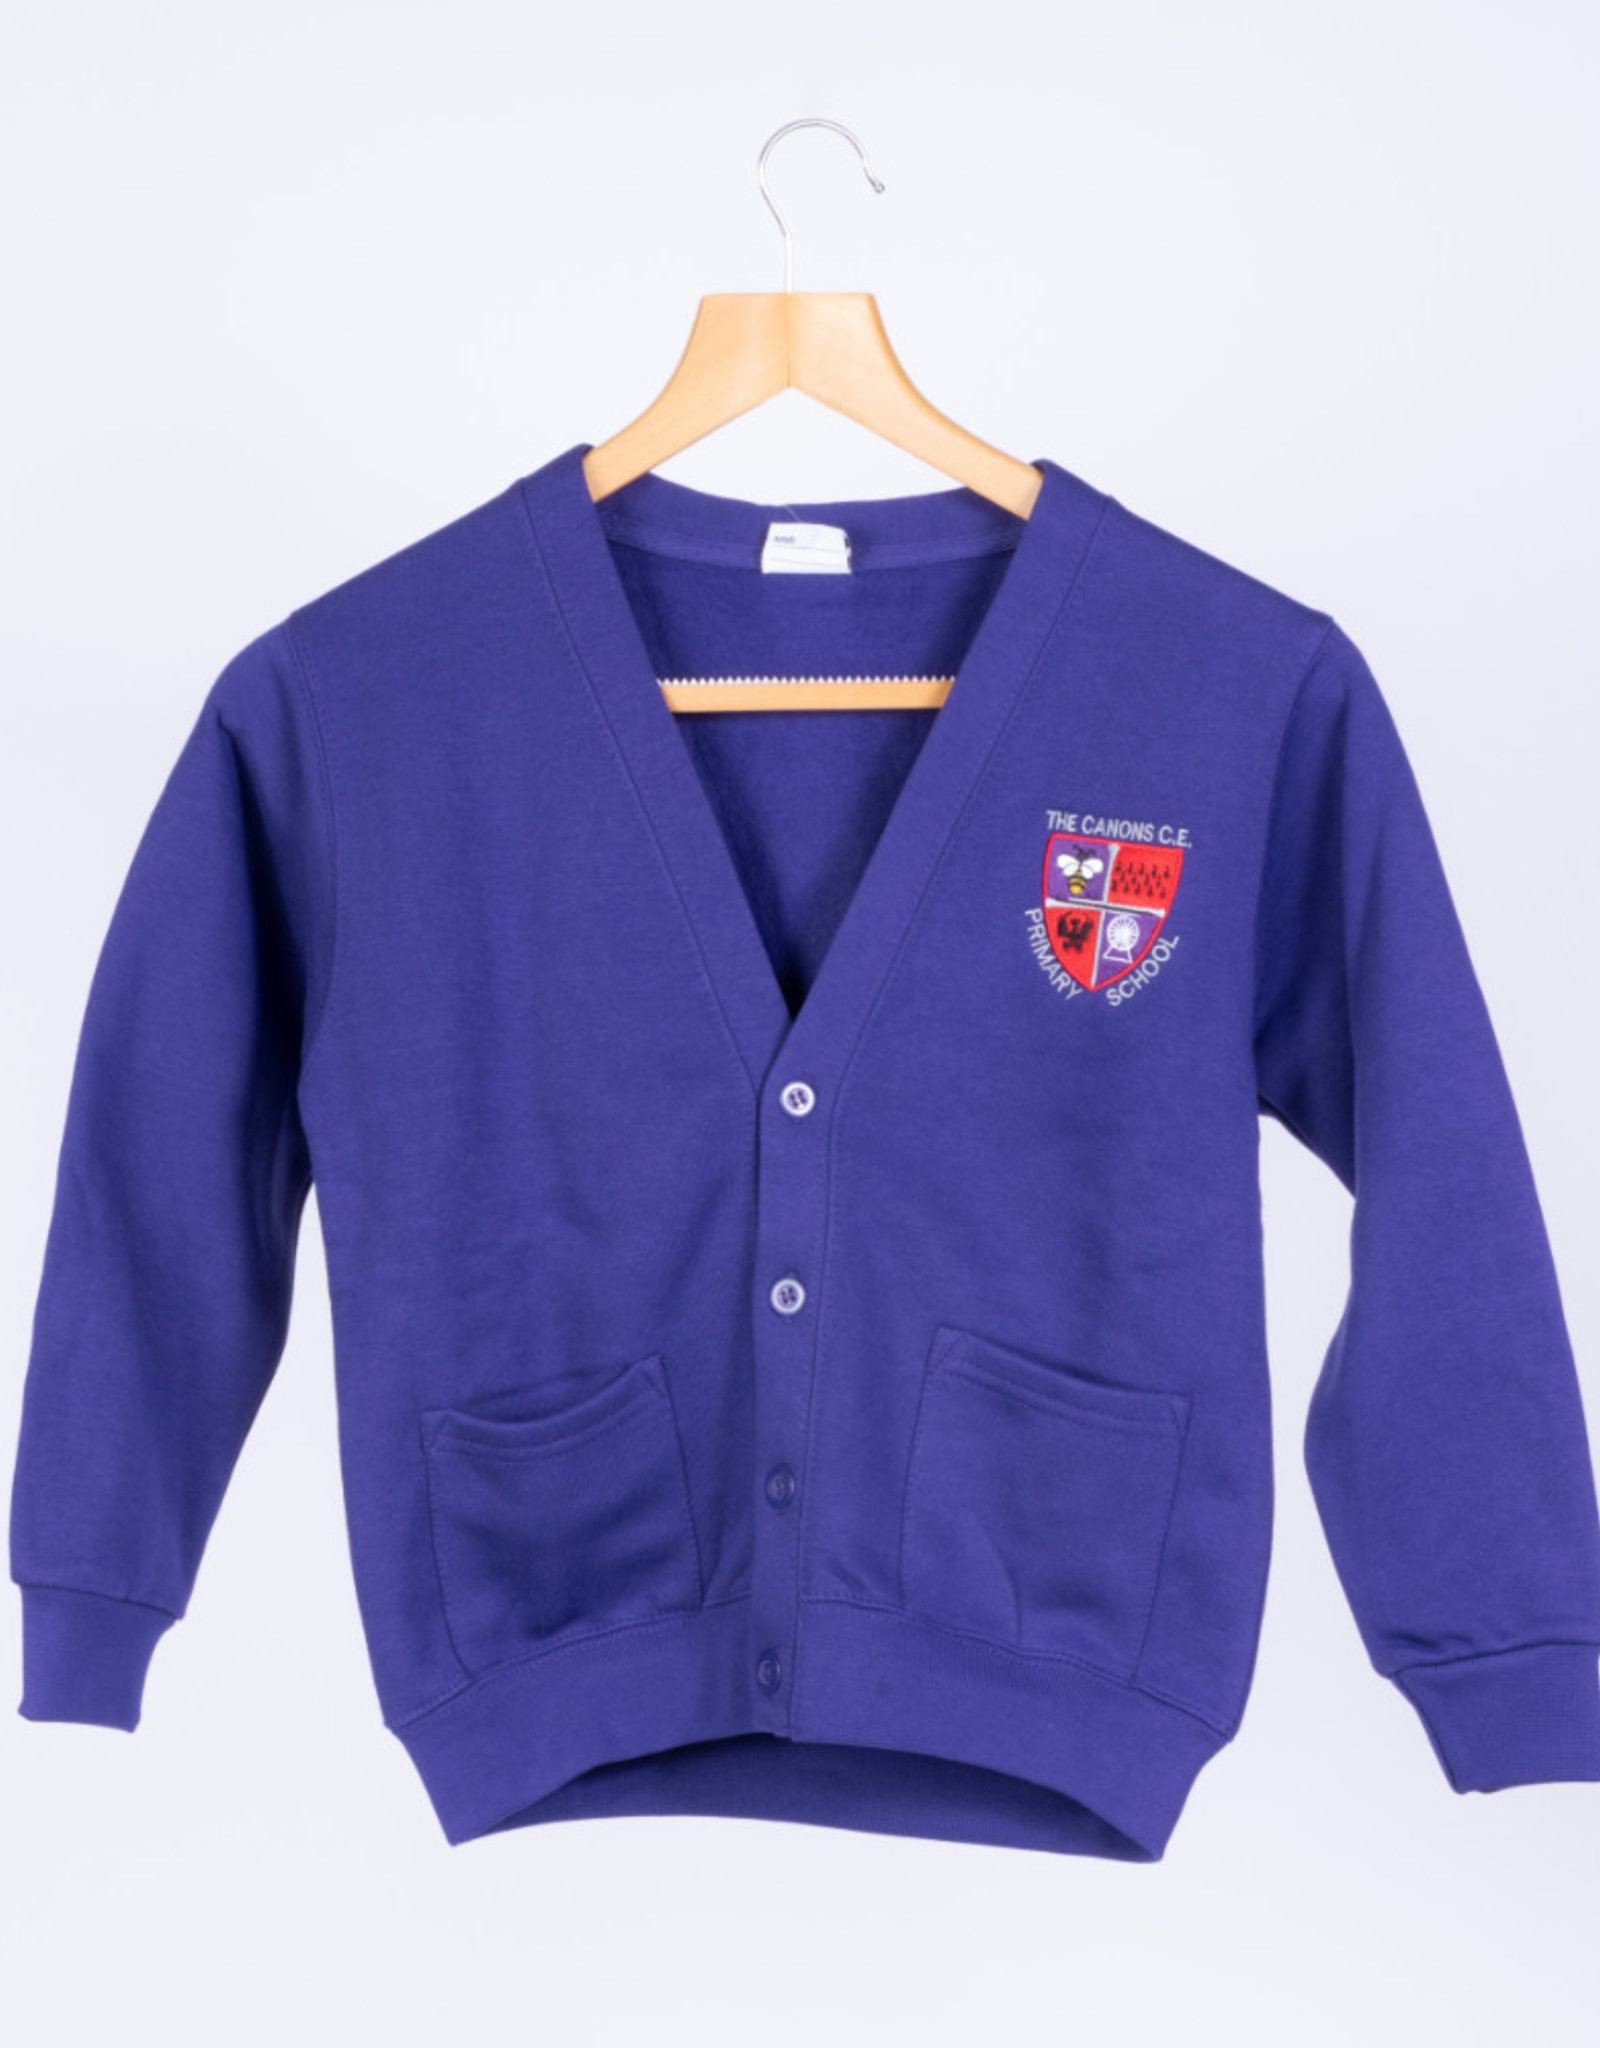 Cardigan Child Size - The Canons CE Primary School